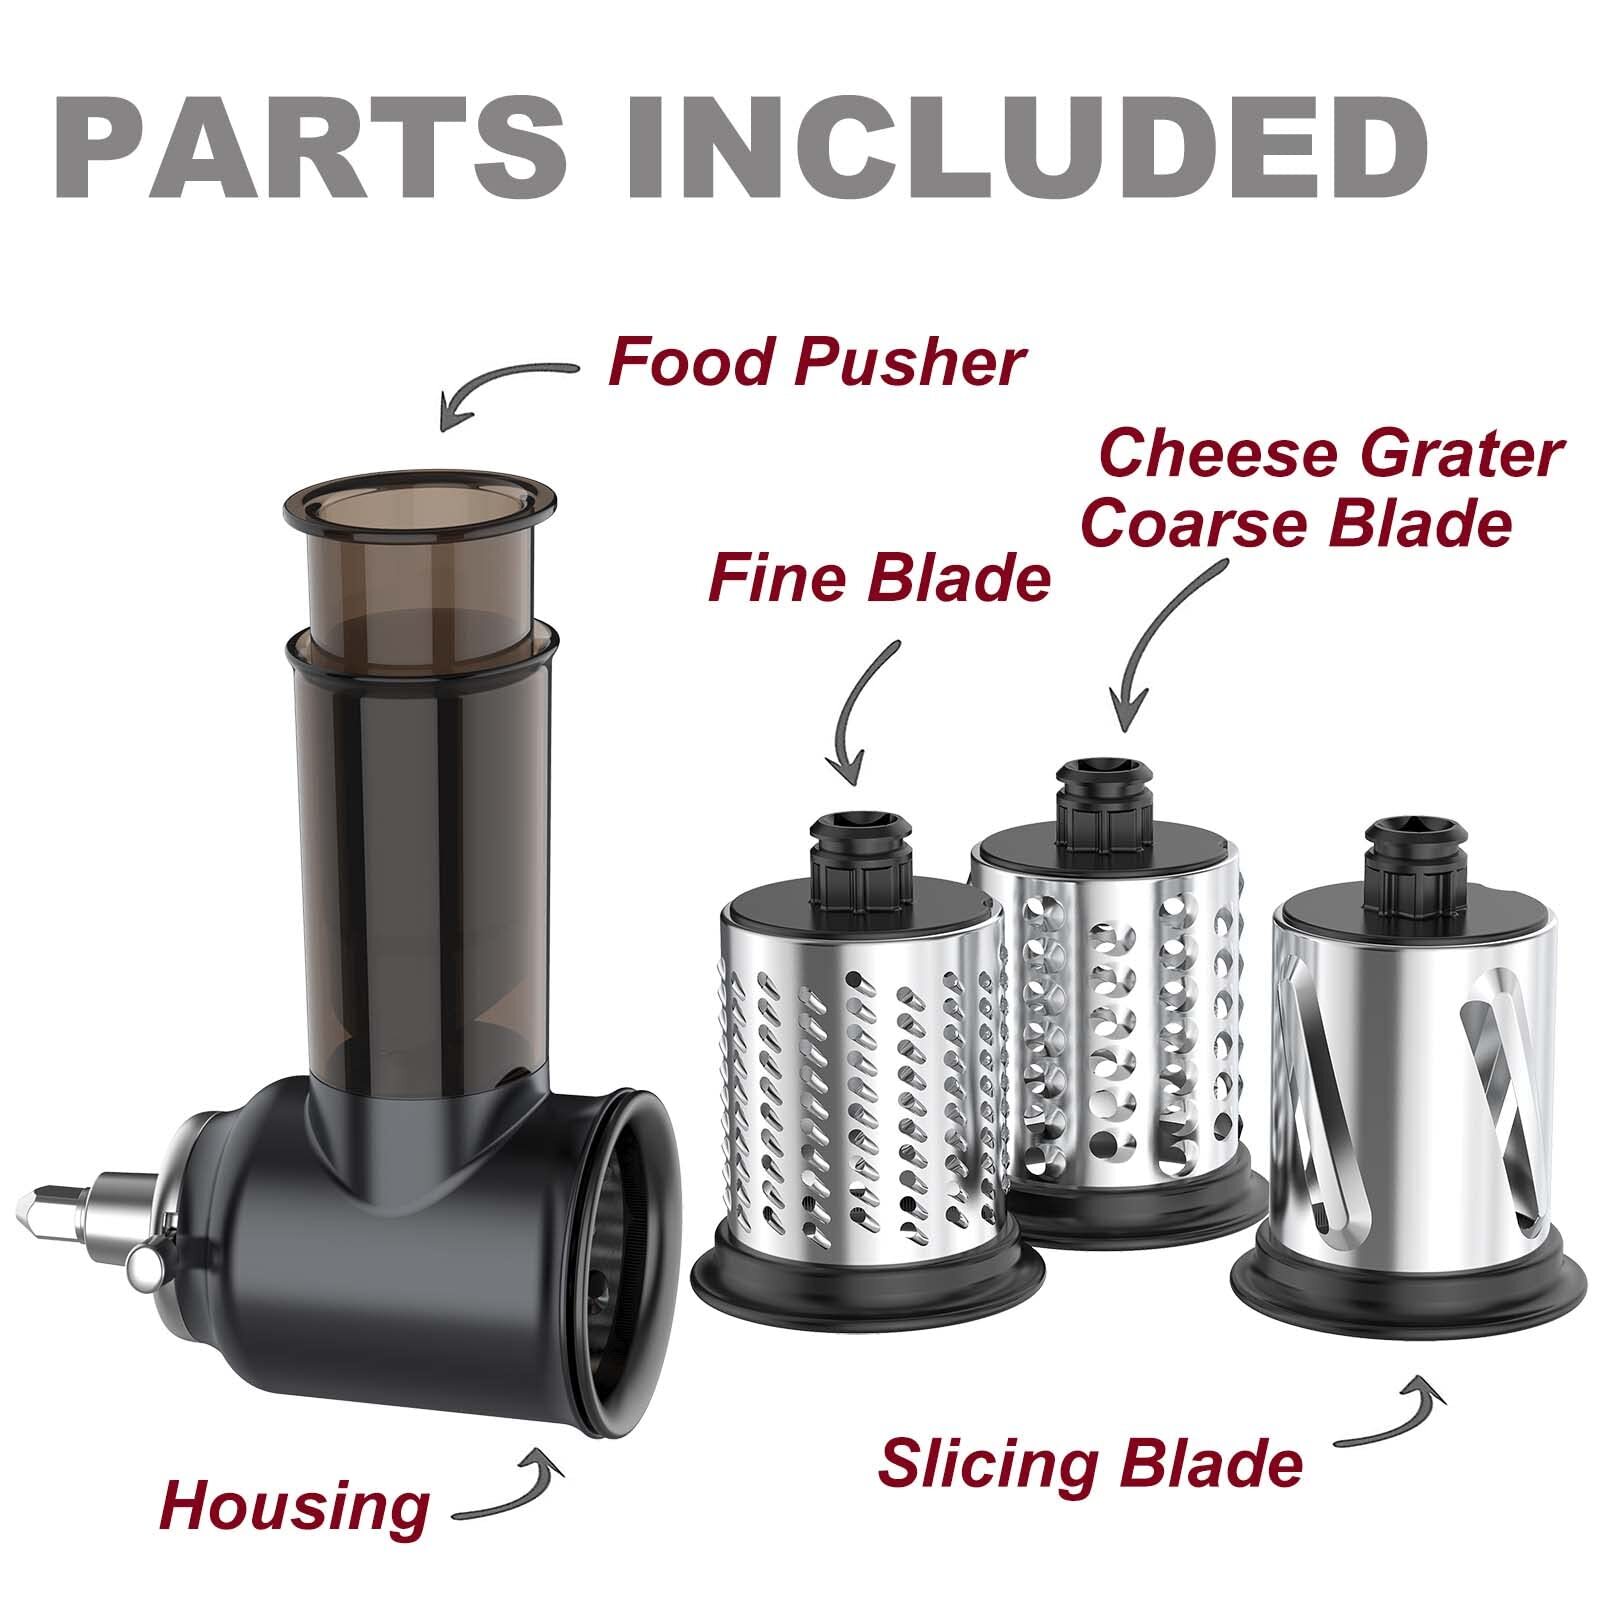 InnoMoon Slicer Shredder Attachment Set with Cheese Grater - Compatible with KitchenAid Stand Mixer - image 2 of 6